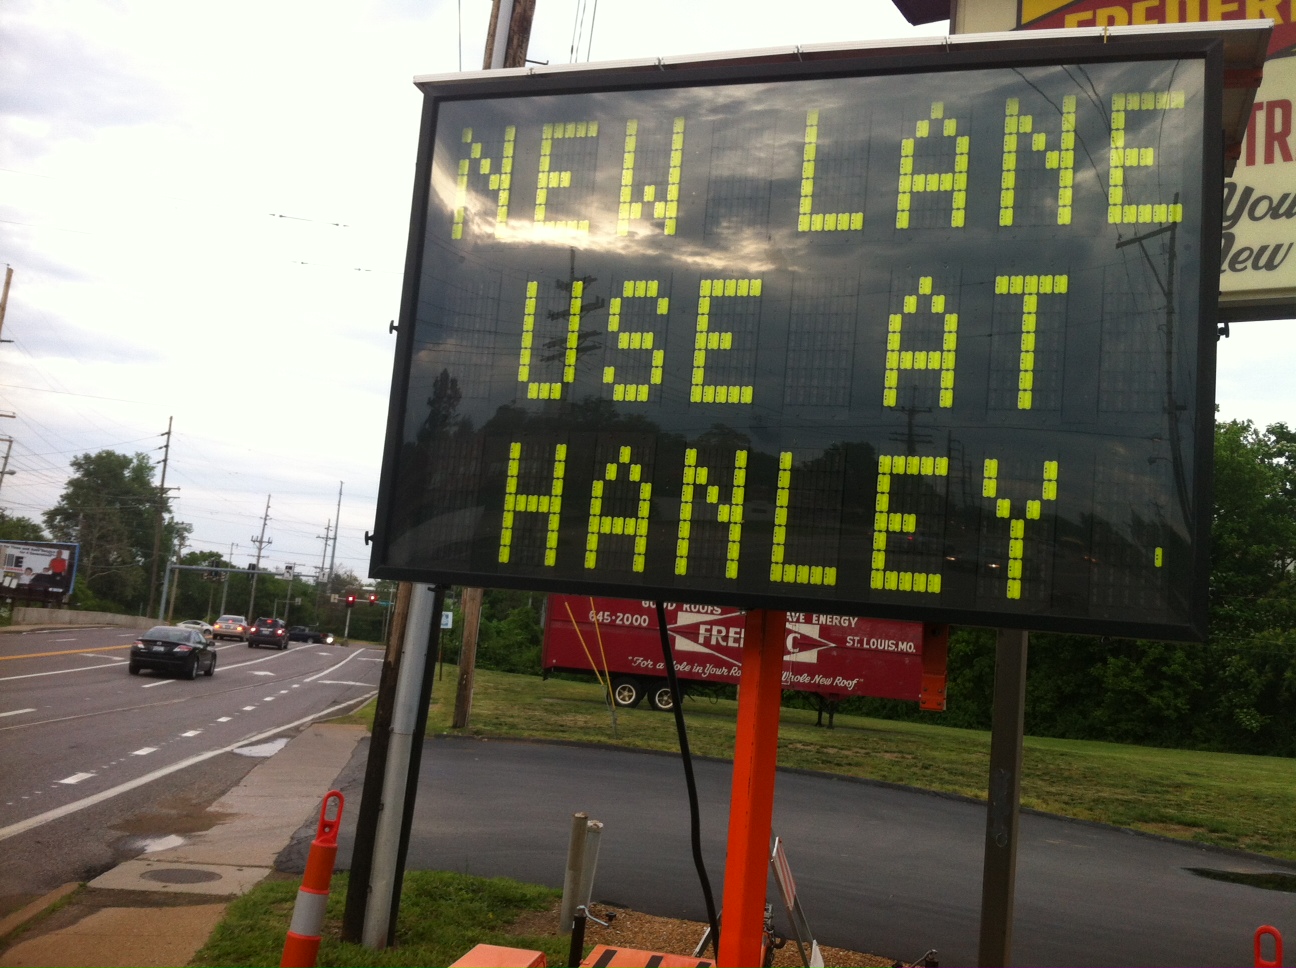 New lanes marked on Manchester Road